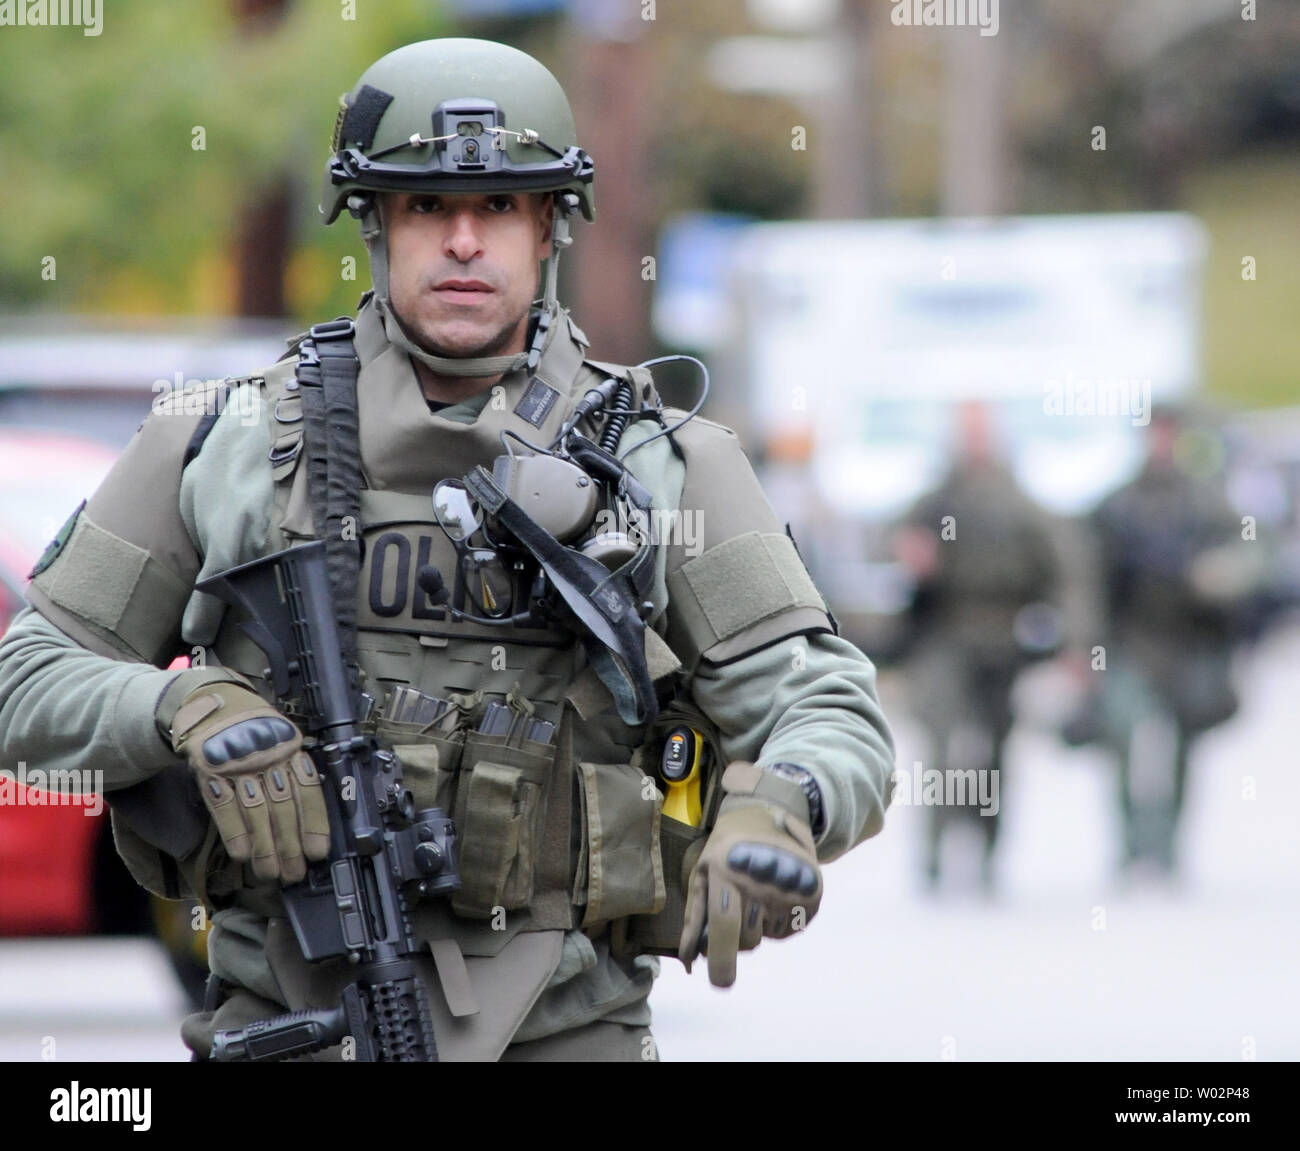 Pittsburgh police officer departs the scene of the mass shooting at the Tree of Life Synagogue in the Squirrel Hill neighborhood of Pittsburgh where at least 11 people have died on October 27, 2018 .  The shooter, Robert Bowers, armed with an assault rifle killed 11 people before surrendering to the police .  Photo by Archie Carpenter/UPI Stock Photo